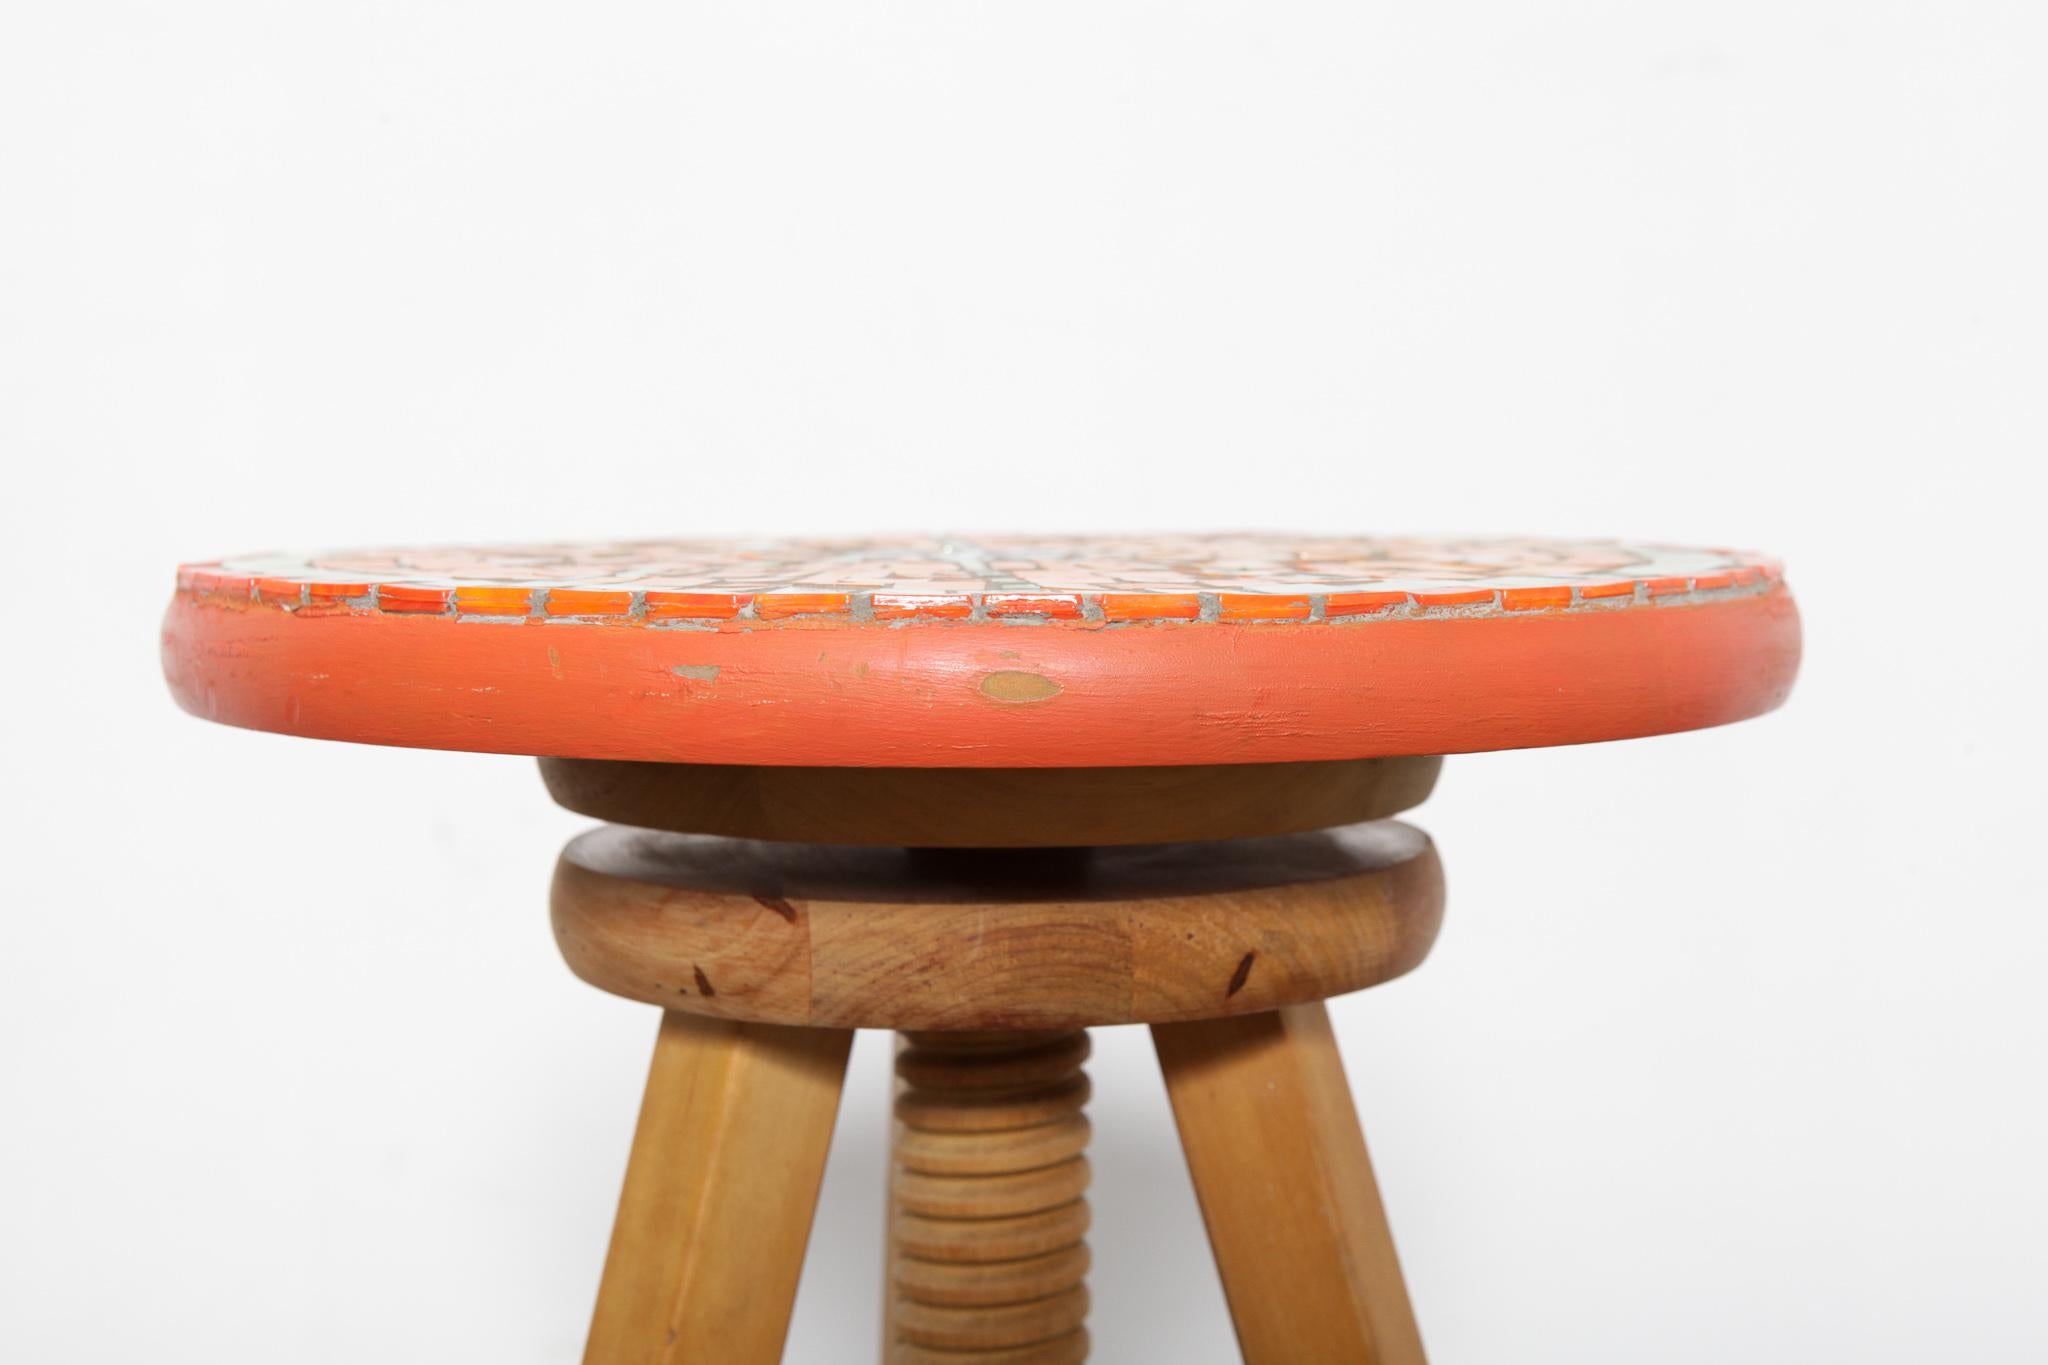 Finnish Adjustable Stool from Finland with Mosaic Tile Seat by Designer Martin Cheek For Sale